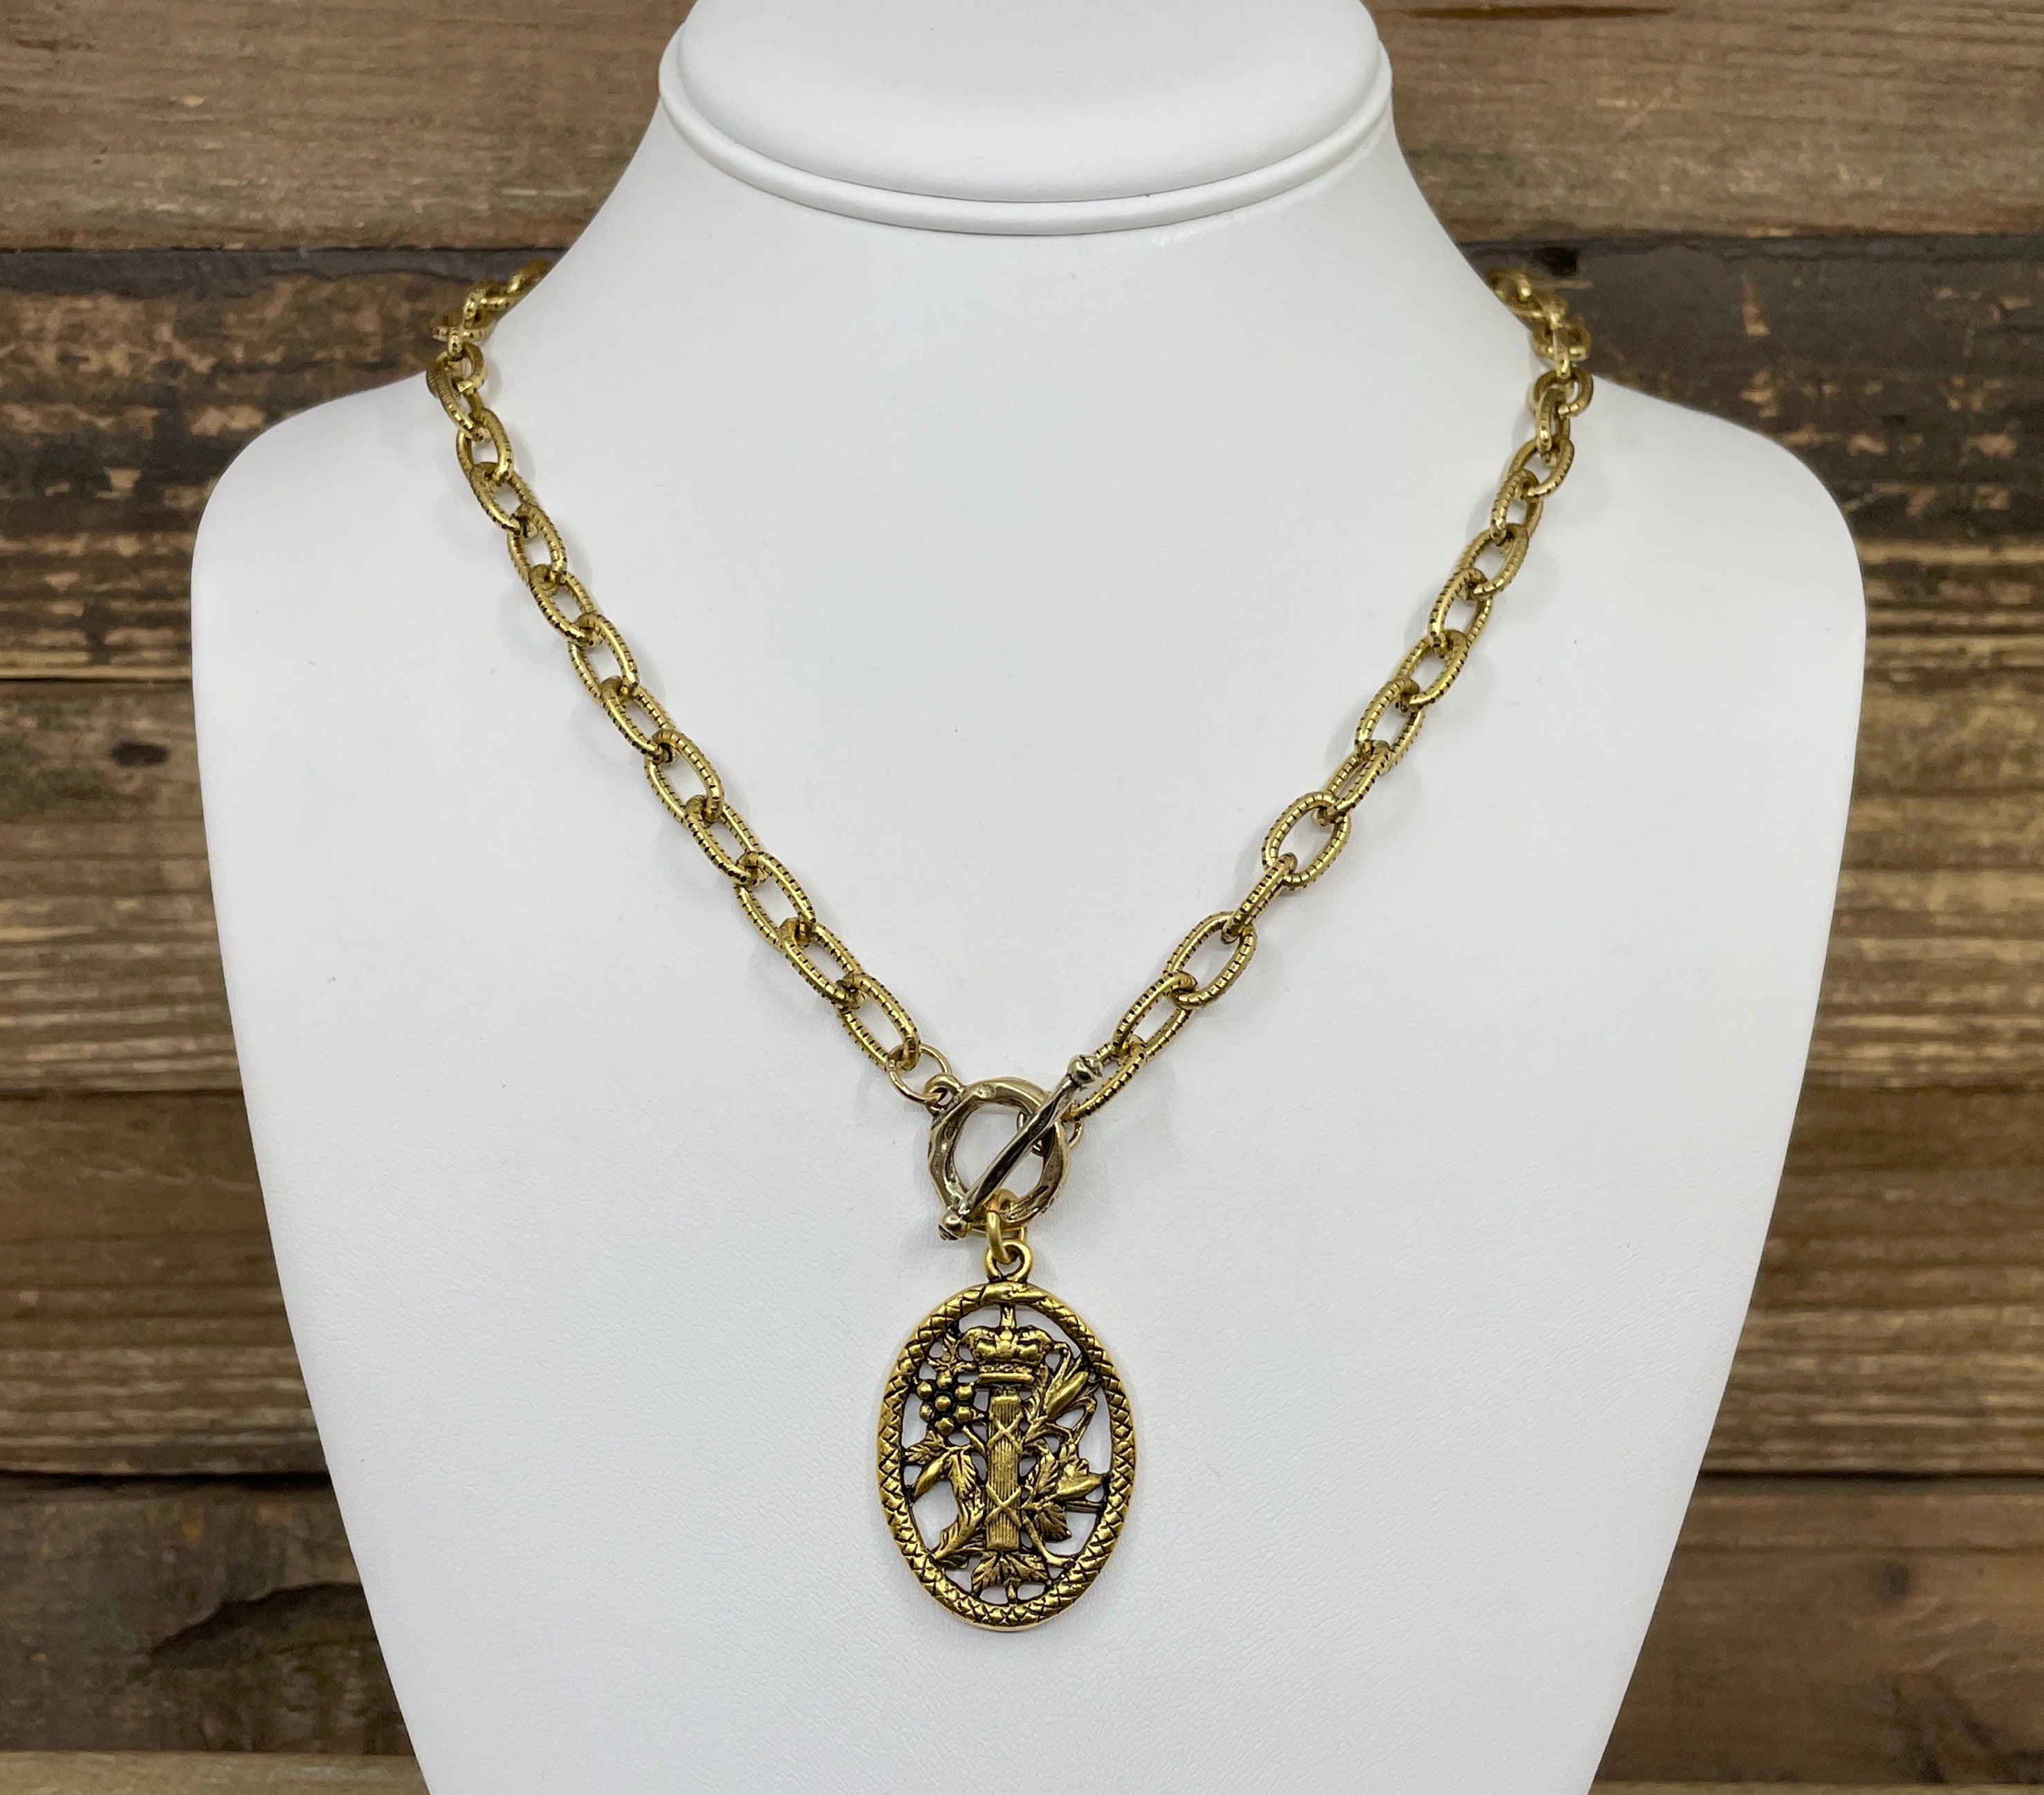 Gold Plated 18" Chain with Gold Plated Scottish Crest Pendant